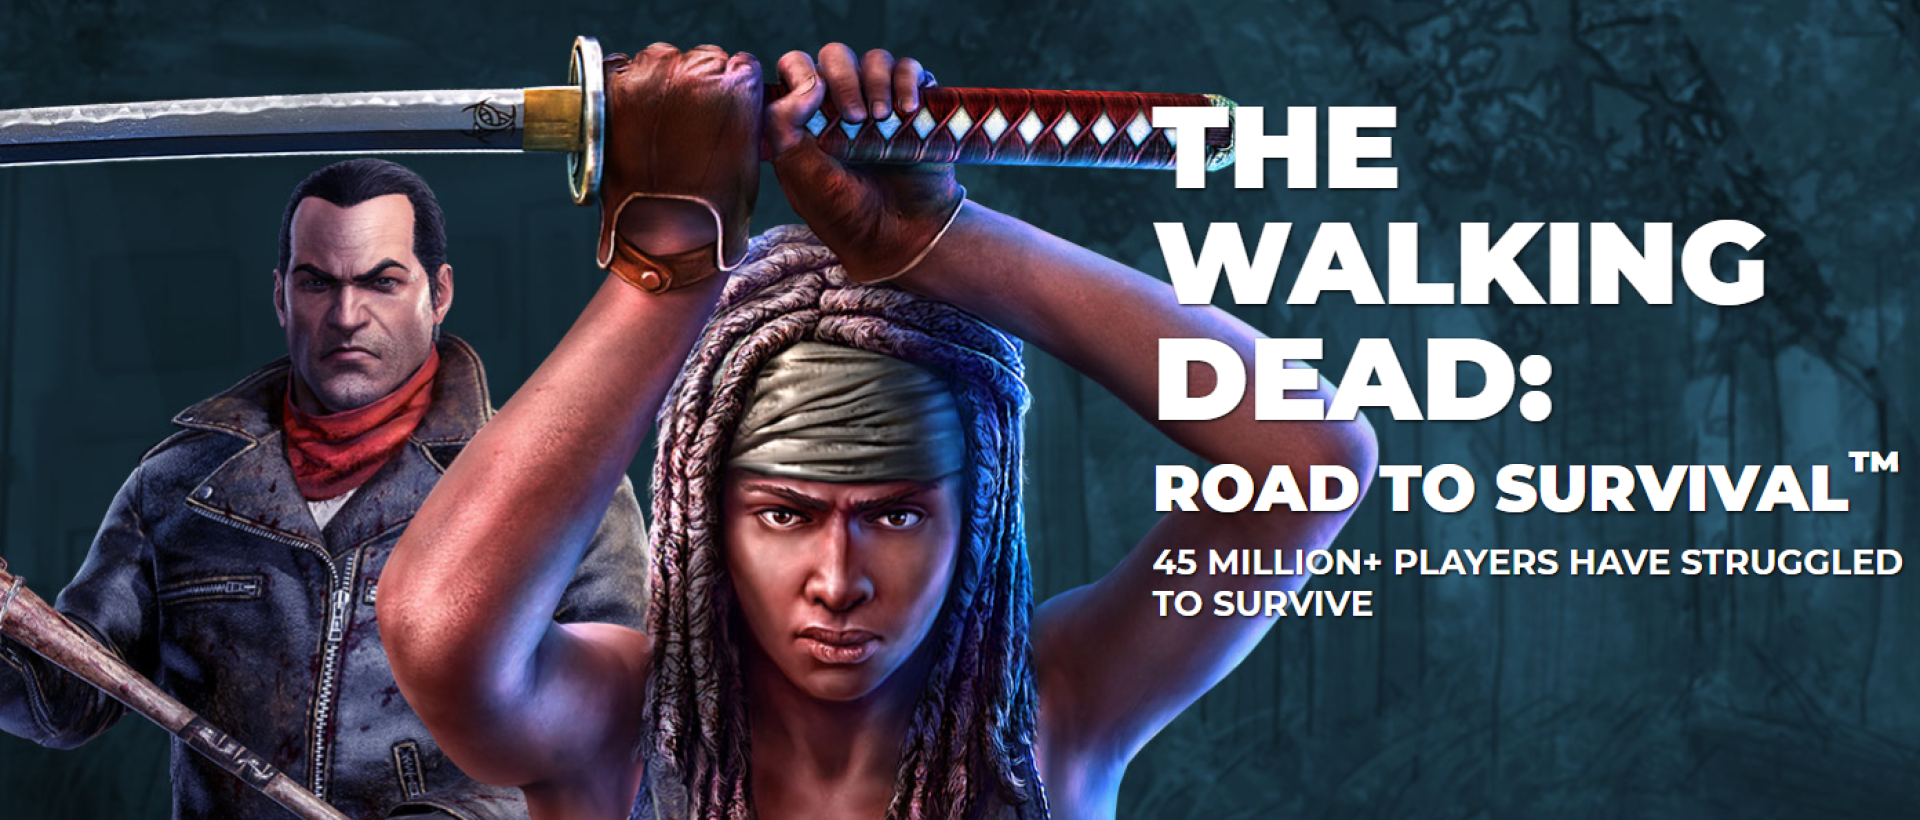 download the walking dead scopely for free